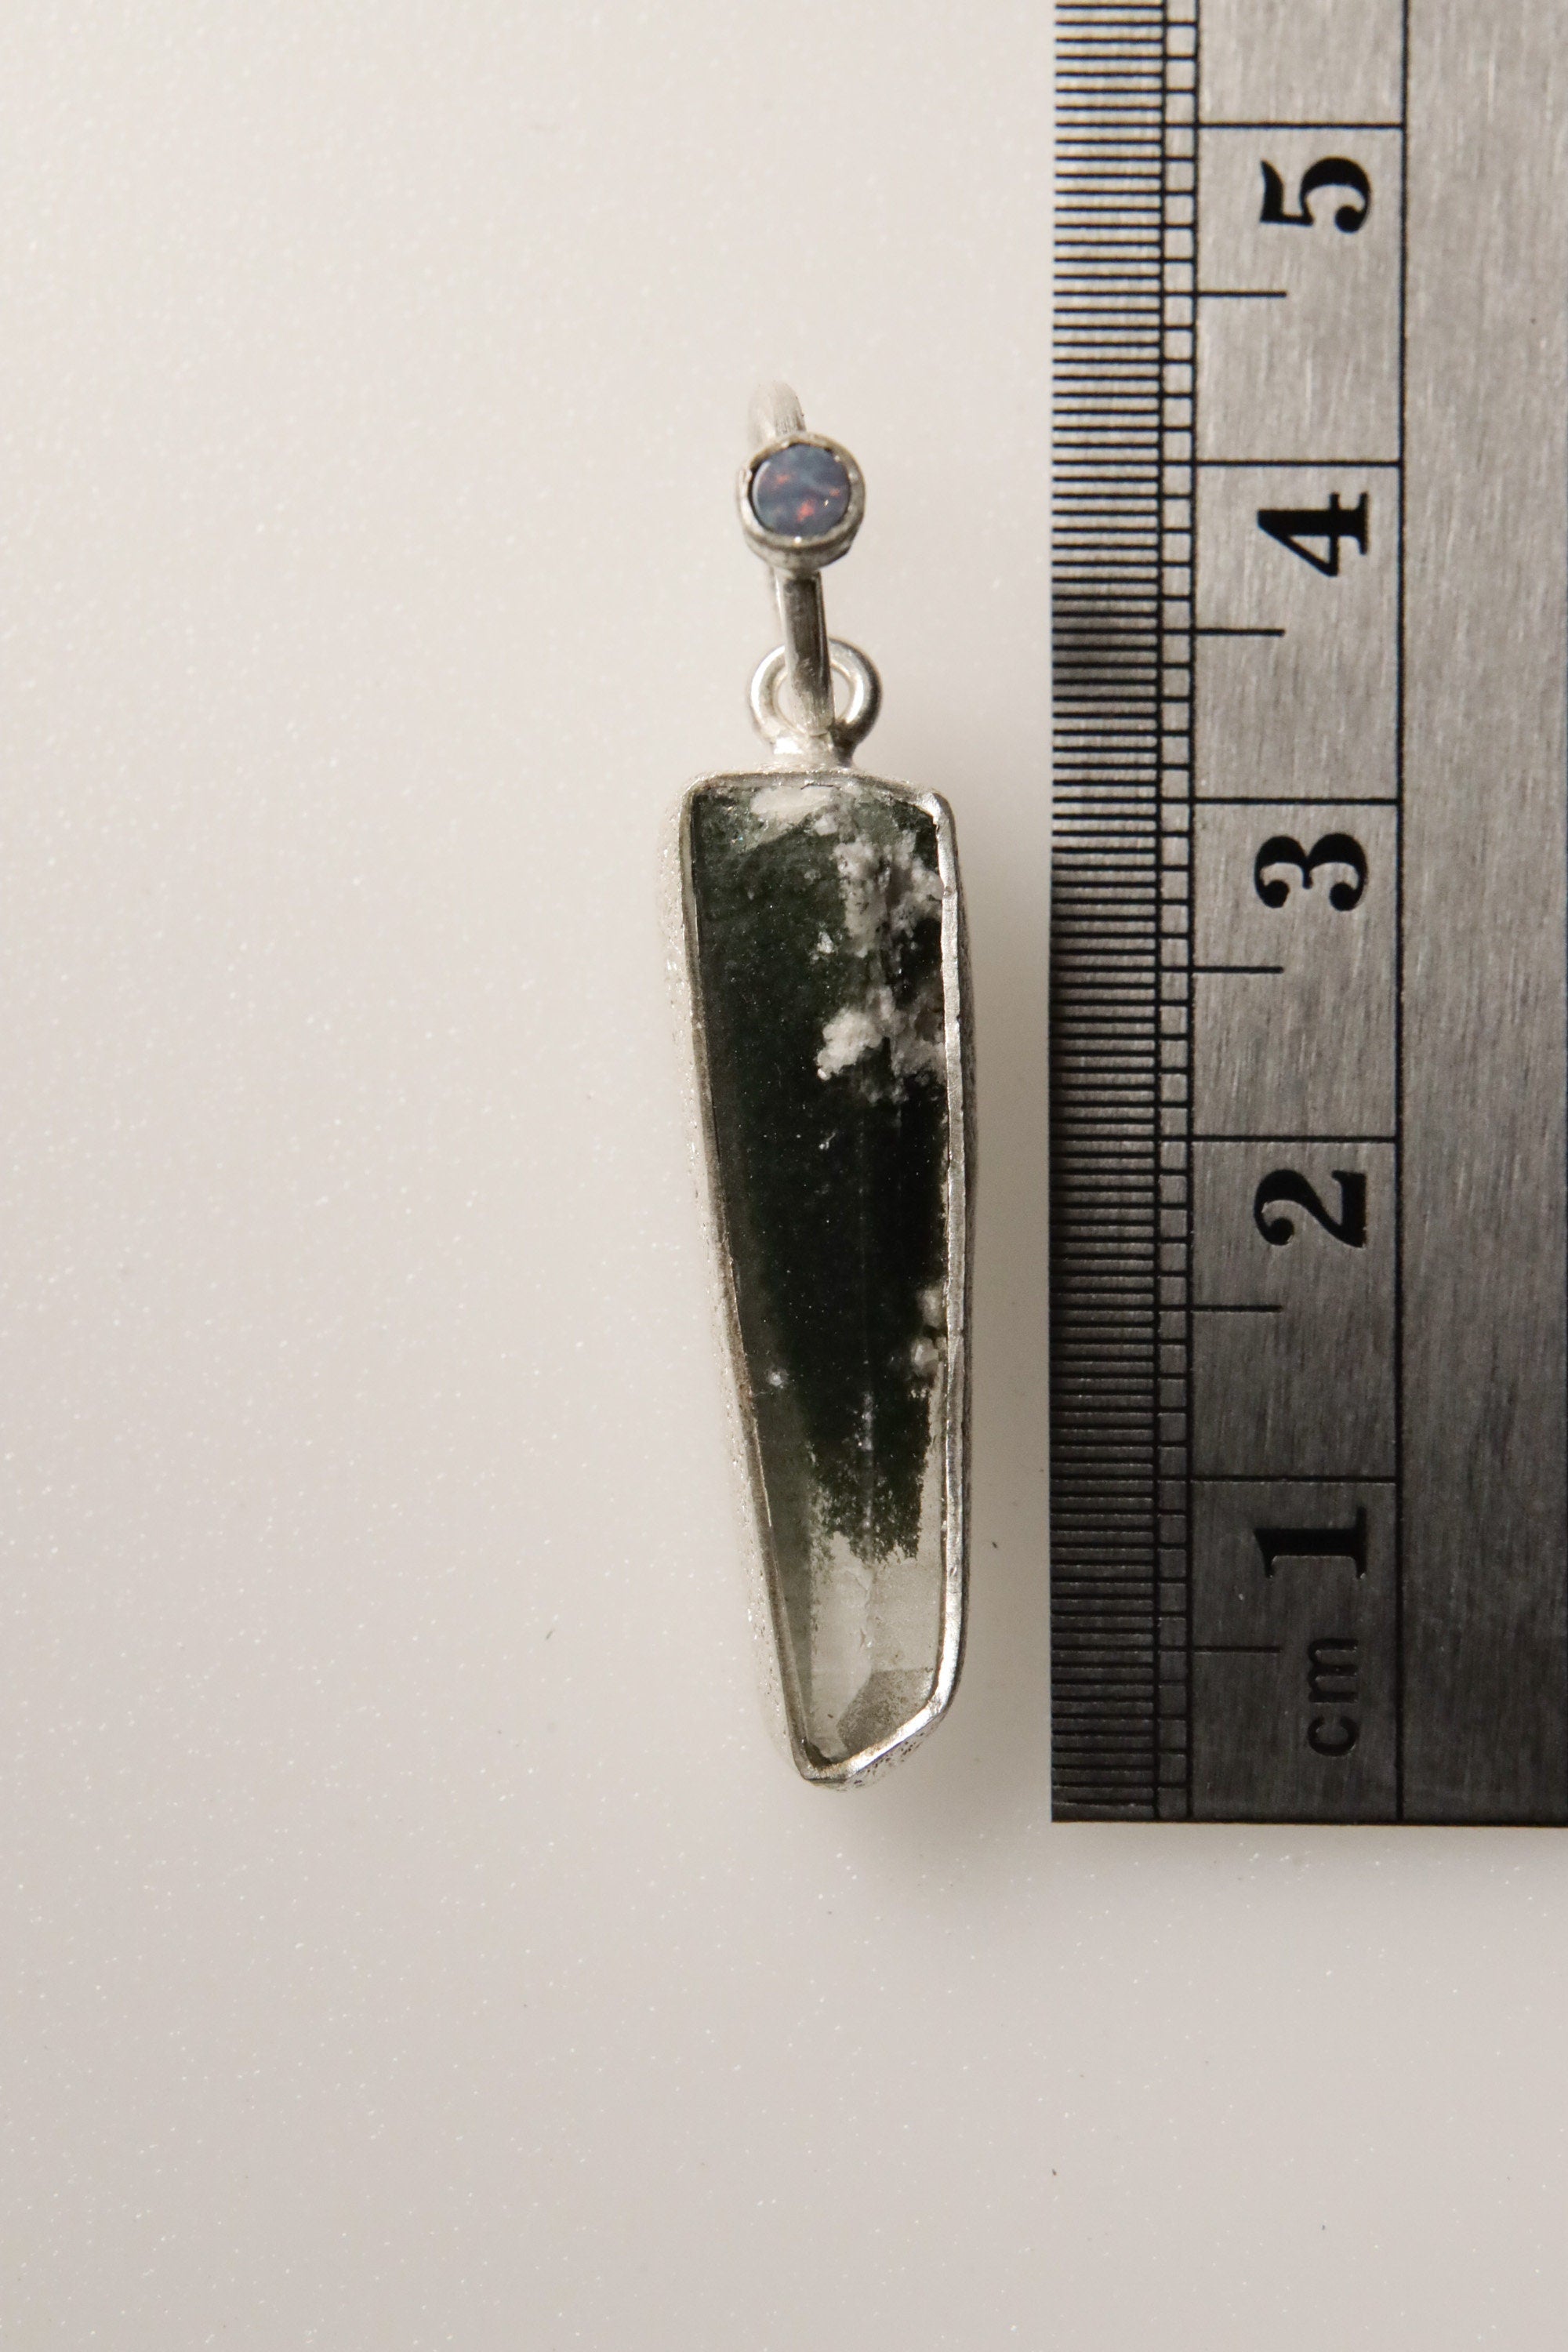 Luminous Peak: Sterling Silver Pendant with Himalayan Chlorite Quartz and Opal - High Shine & Sand Textured - NO/06